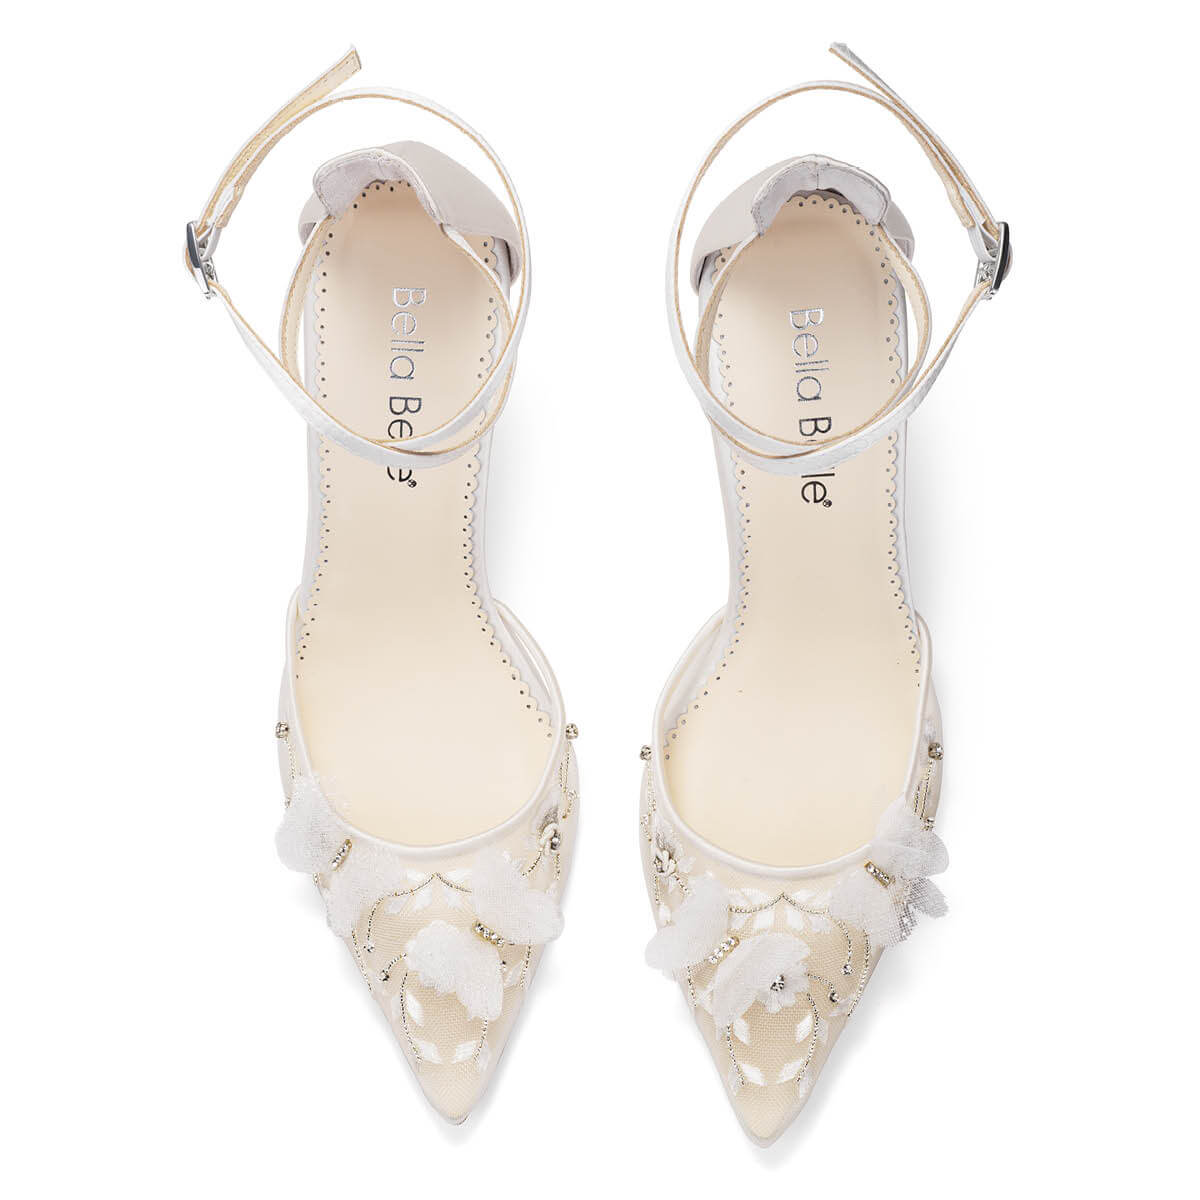 bella belle shoes eve Ivory Butterfly Heels, Garden Party Shoes